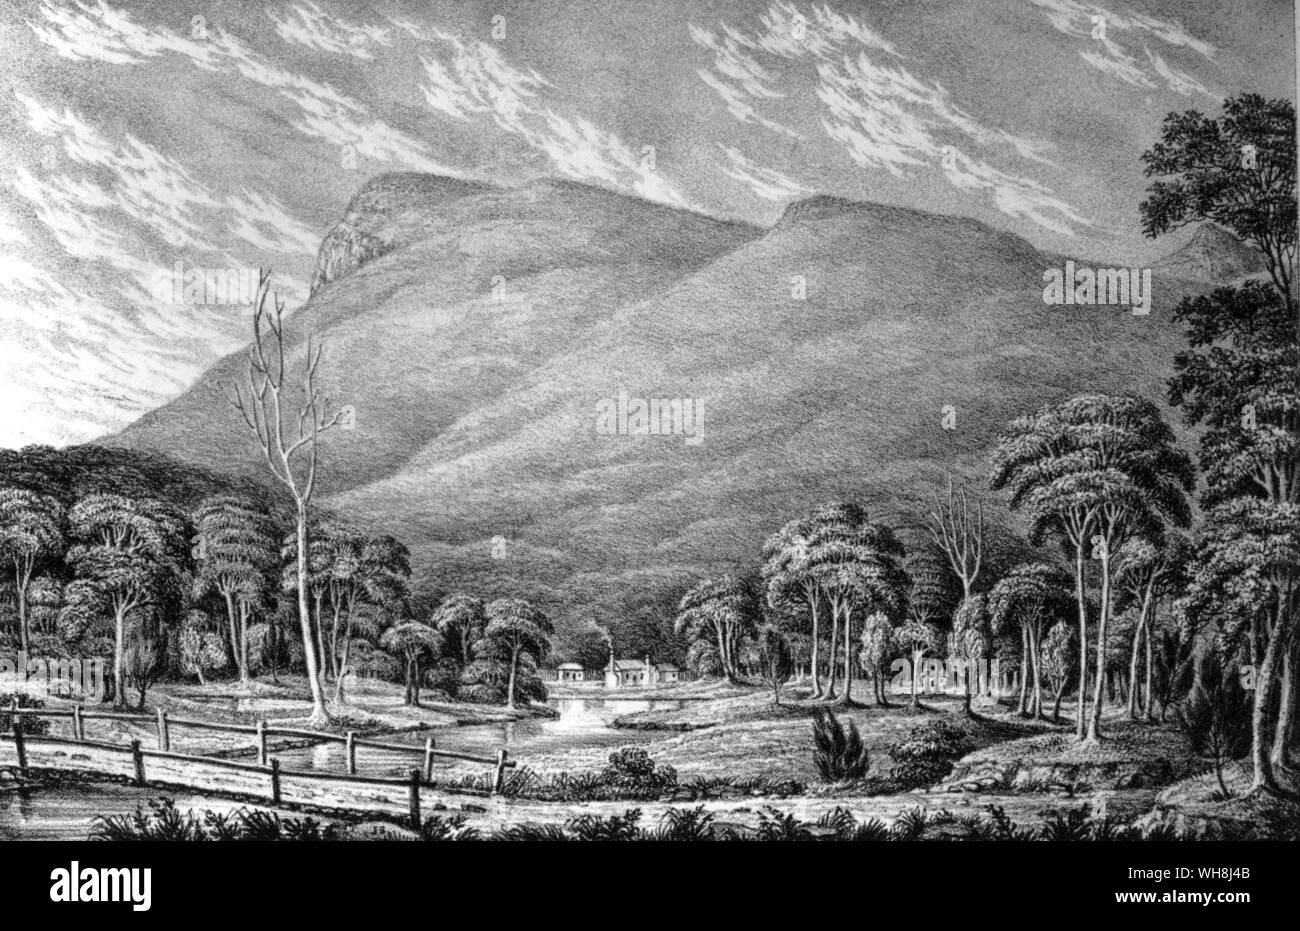 Mount Wellington, Tasmania, which Darwin climbed, but which he found of little picturesque beauty. Altogether both he and FitzRoy were disappointed by the scenery of New Zealand and Australia. Darwin and the Beagle by Alan Moorhead, page 235. Stock Photo